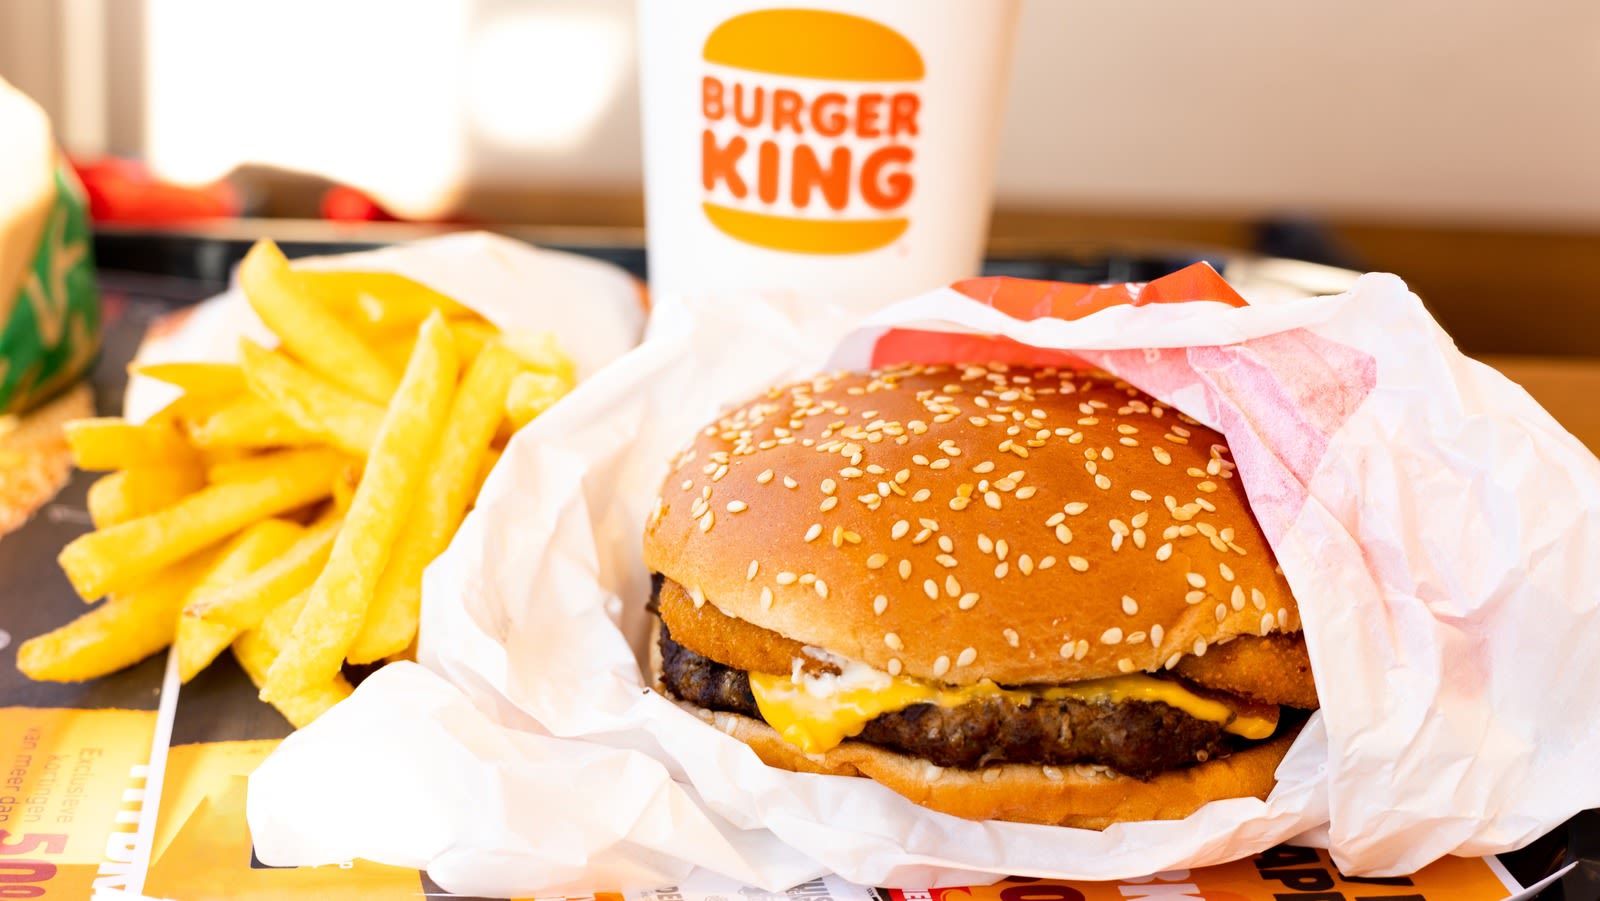 The Discontinued Burger King Sandwich We Can't Believe Was Real